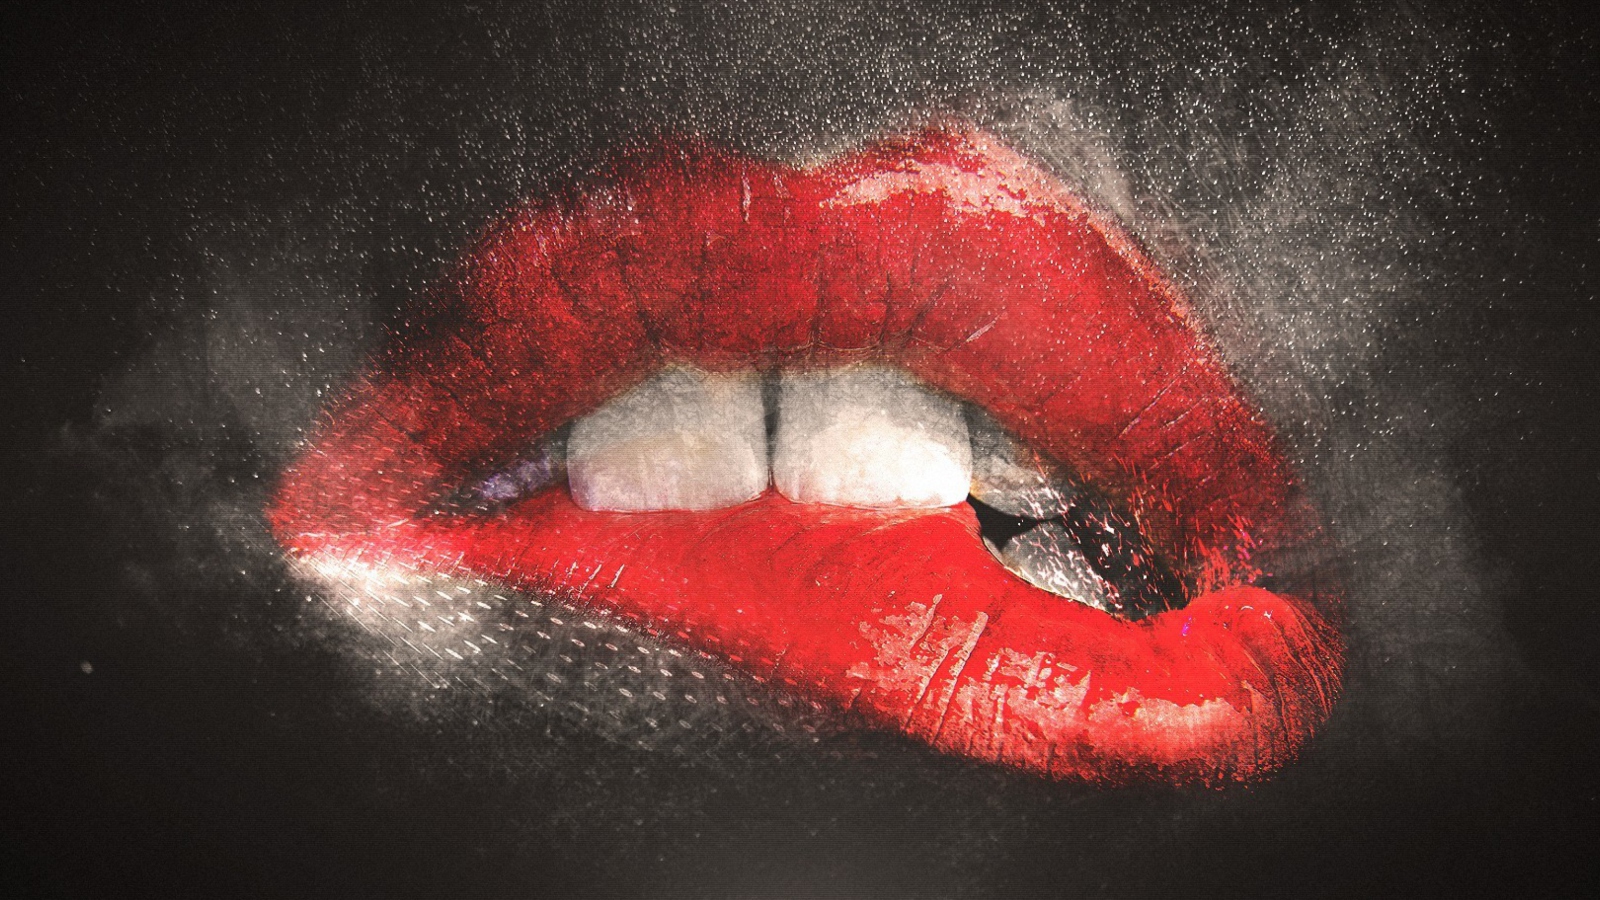 Red Lips Painting wallpaper 1600x900